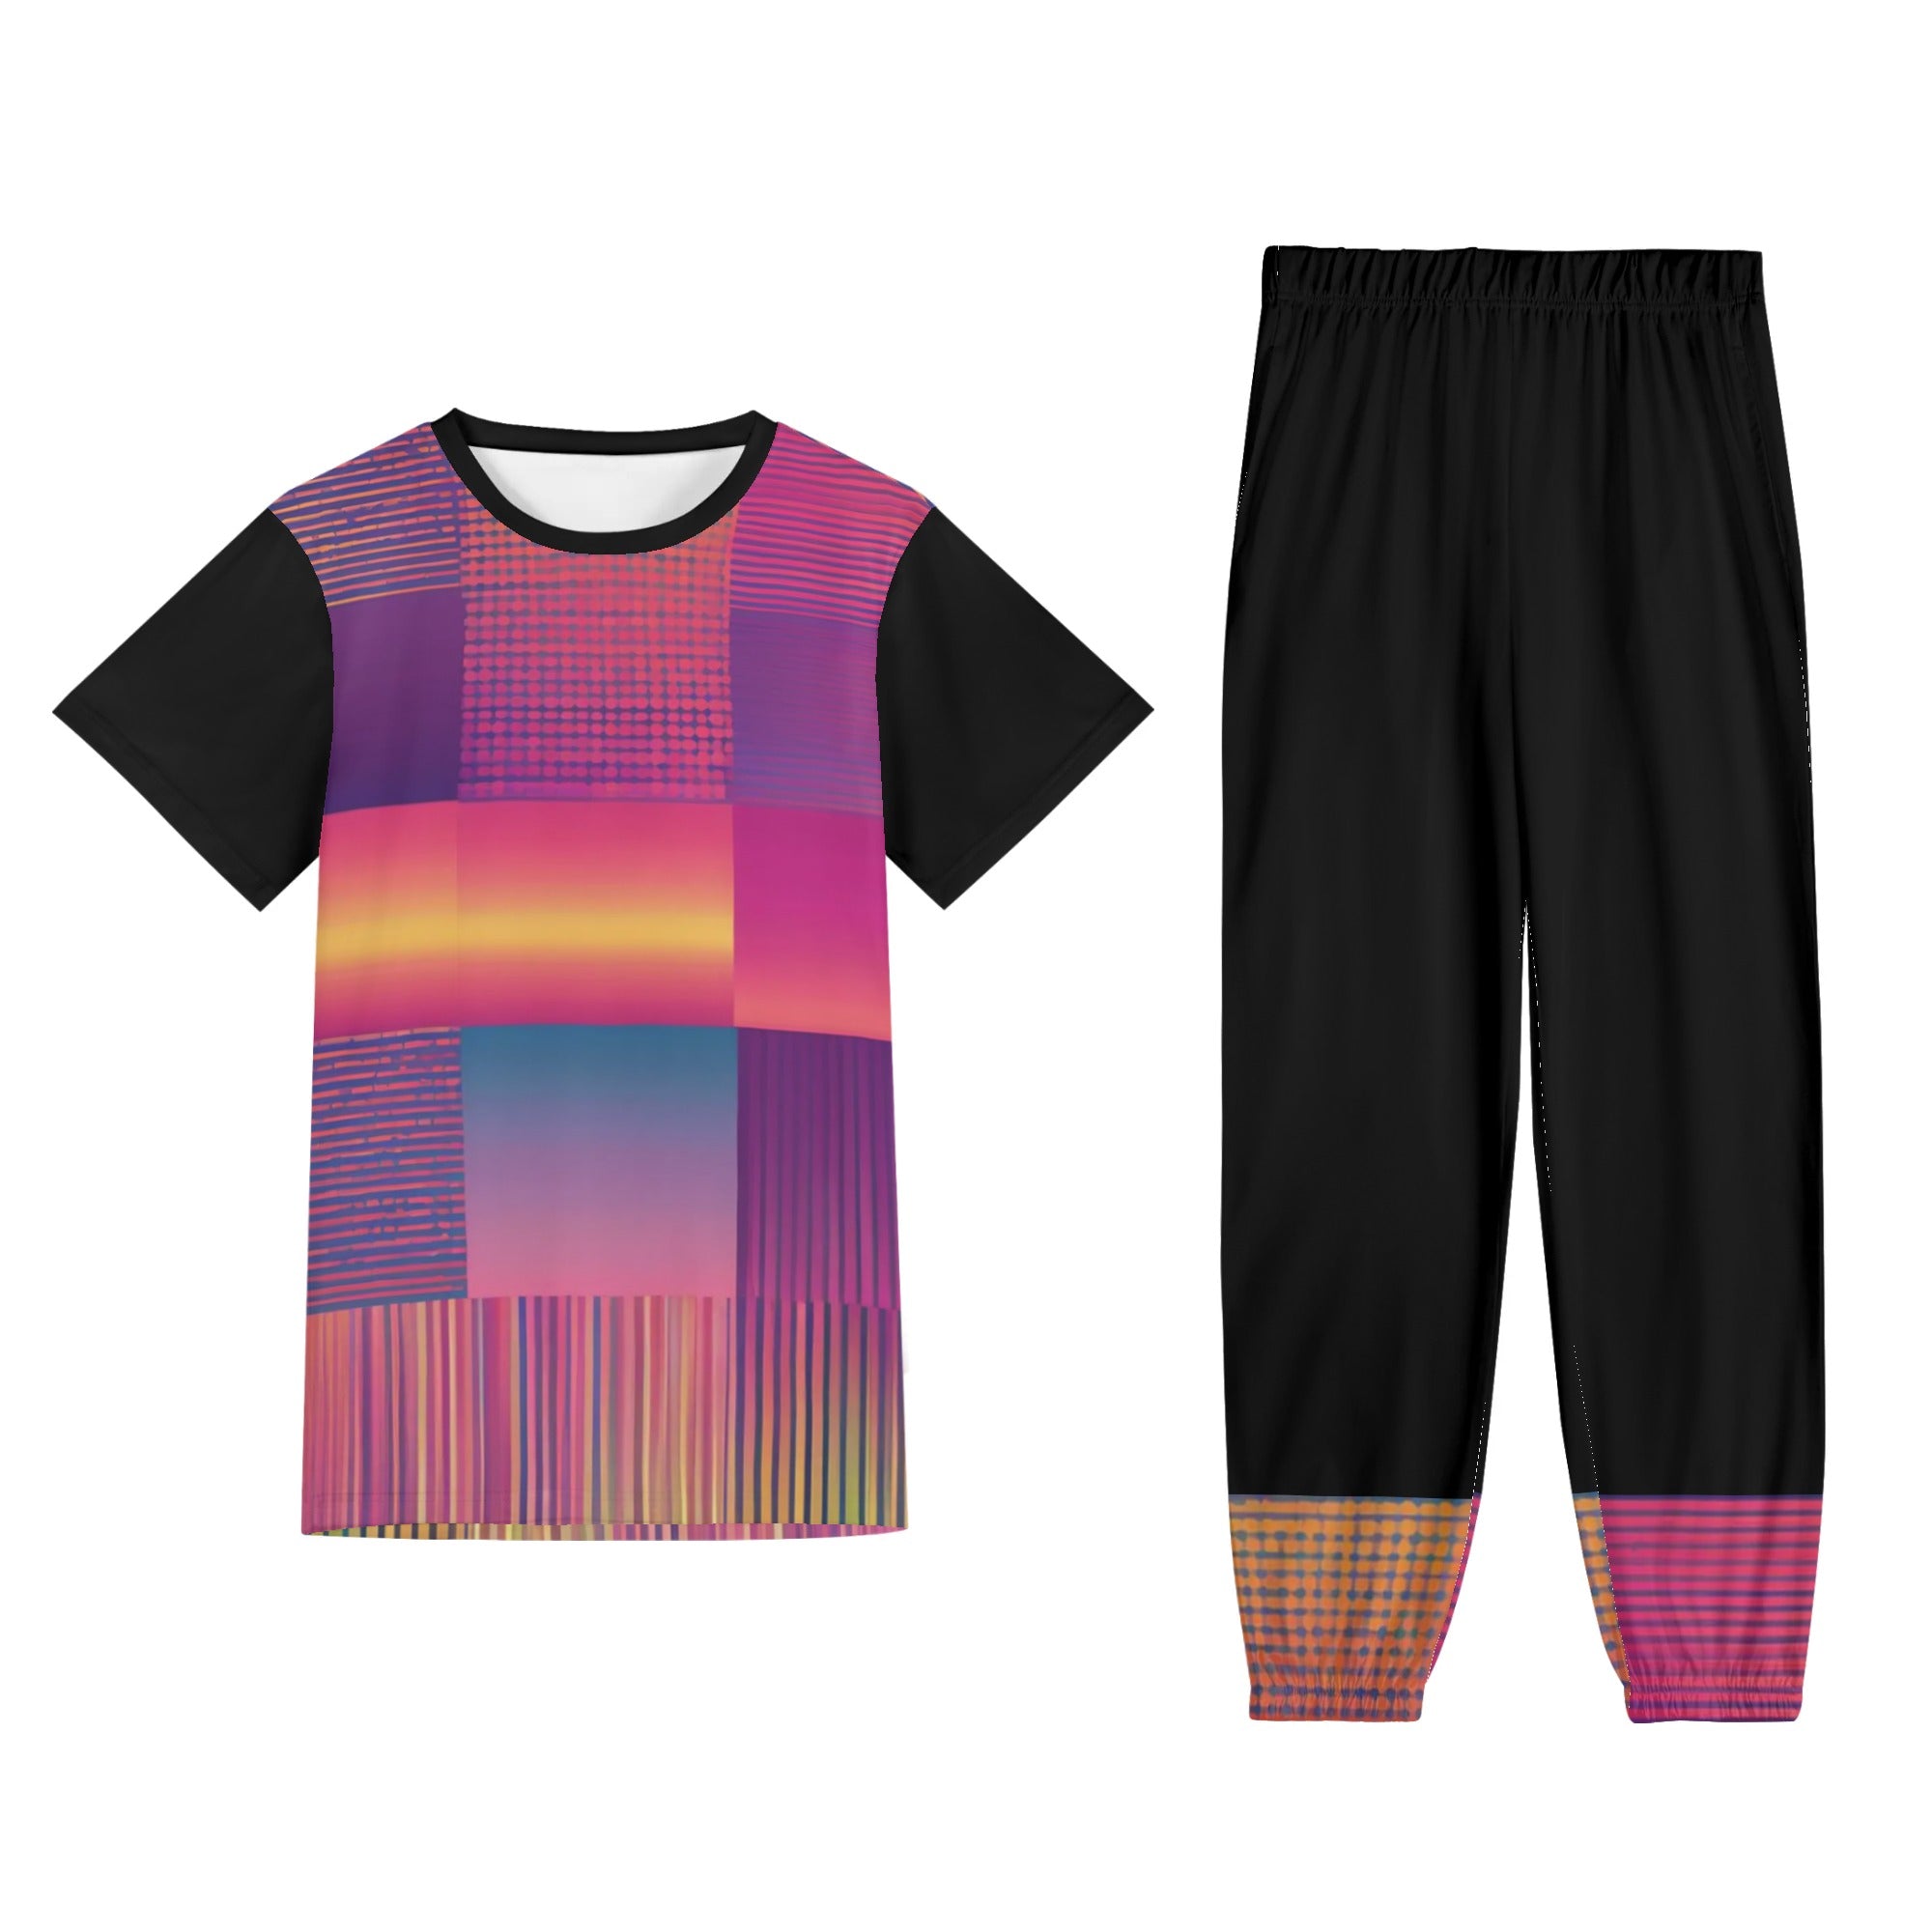 3 - Gradient Style Womens Short Sleeve Sports Outfit Set - at TFC&H Co.